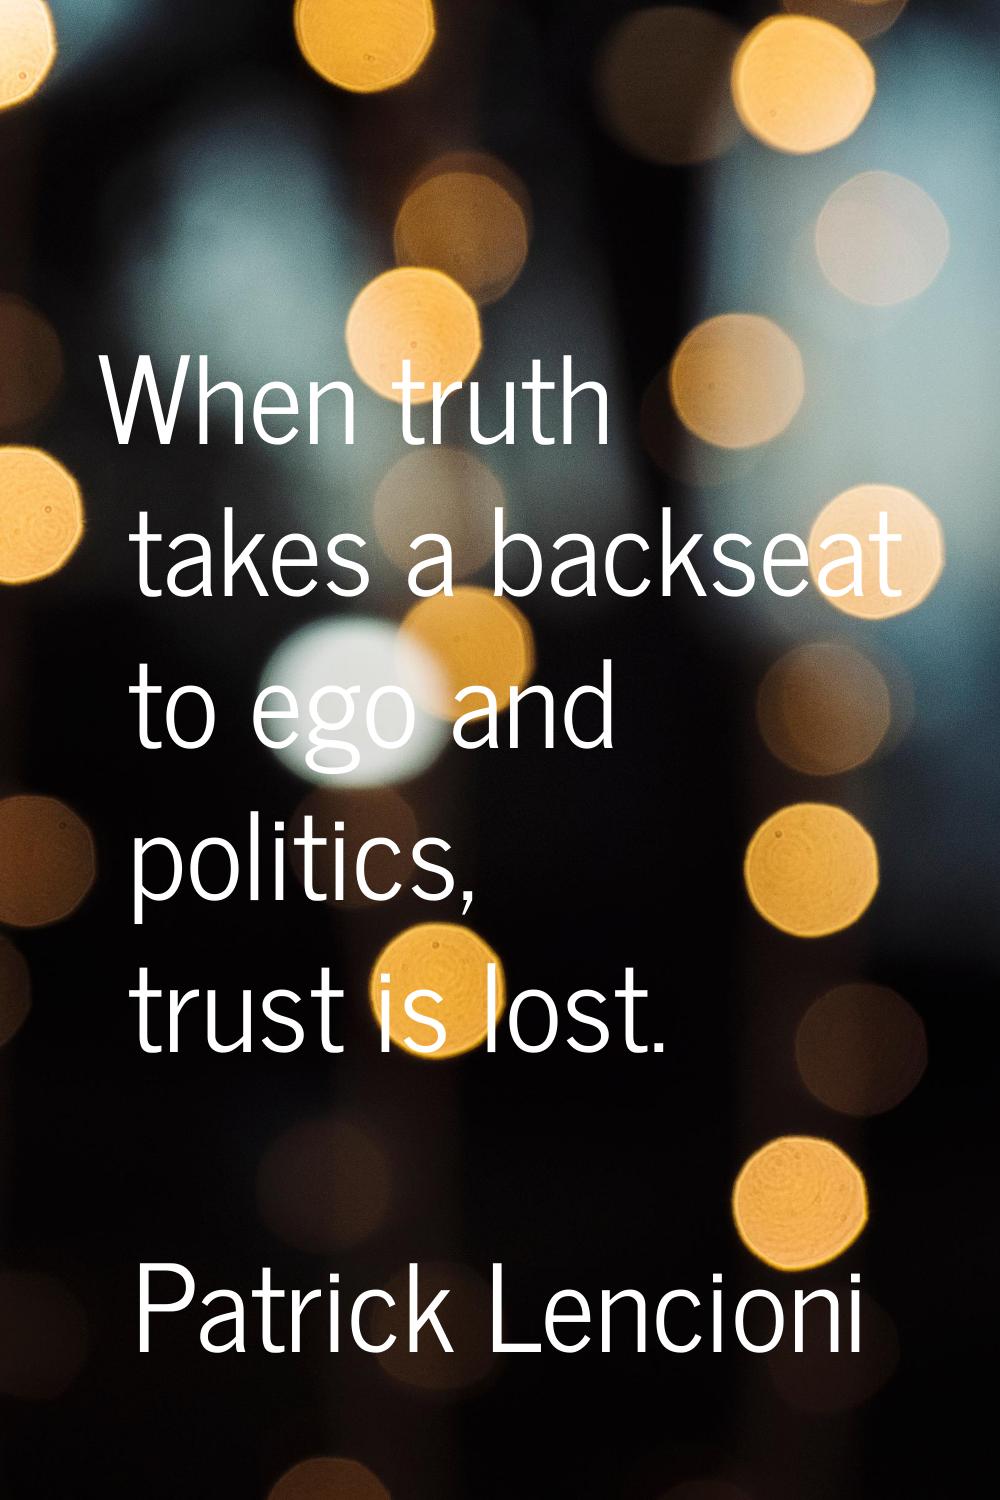 When truth takes a backseat to ego and politics, trust is lost.